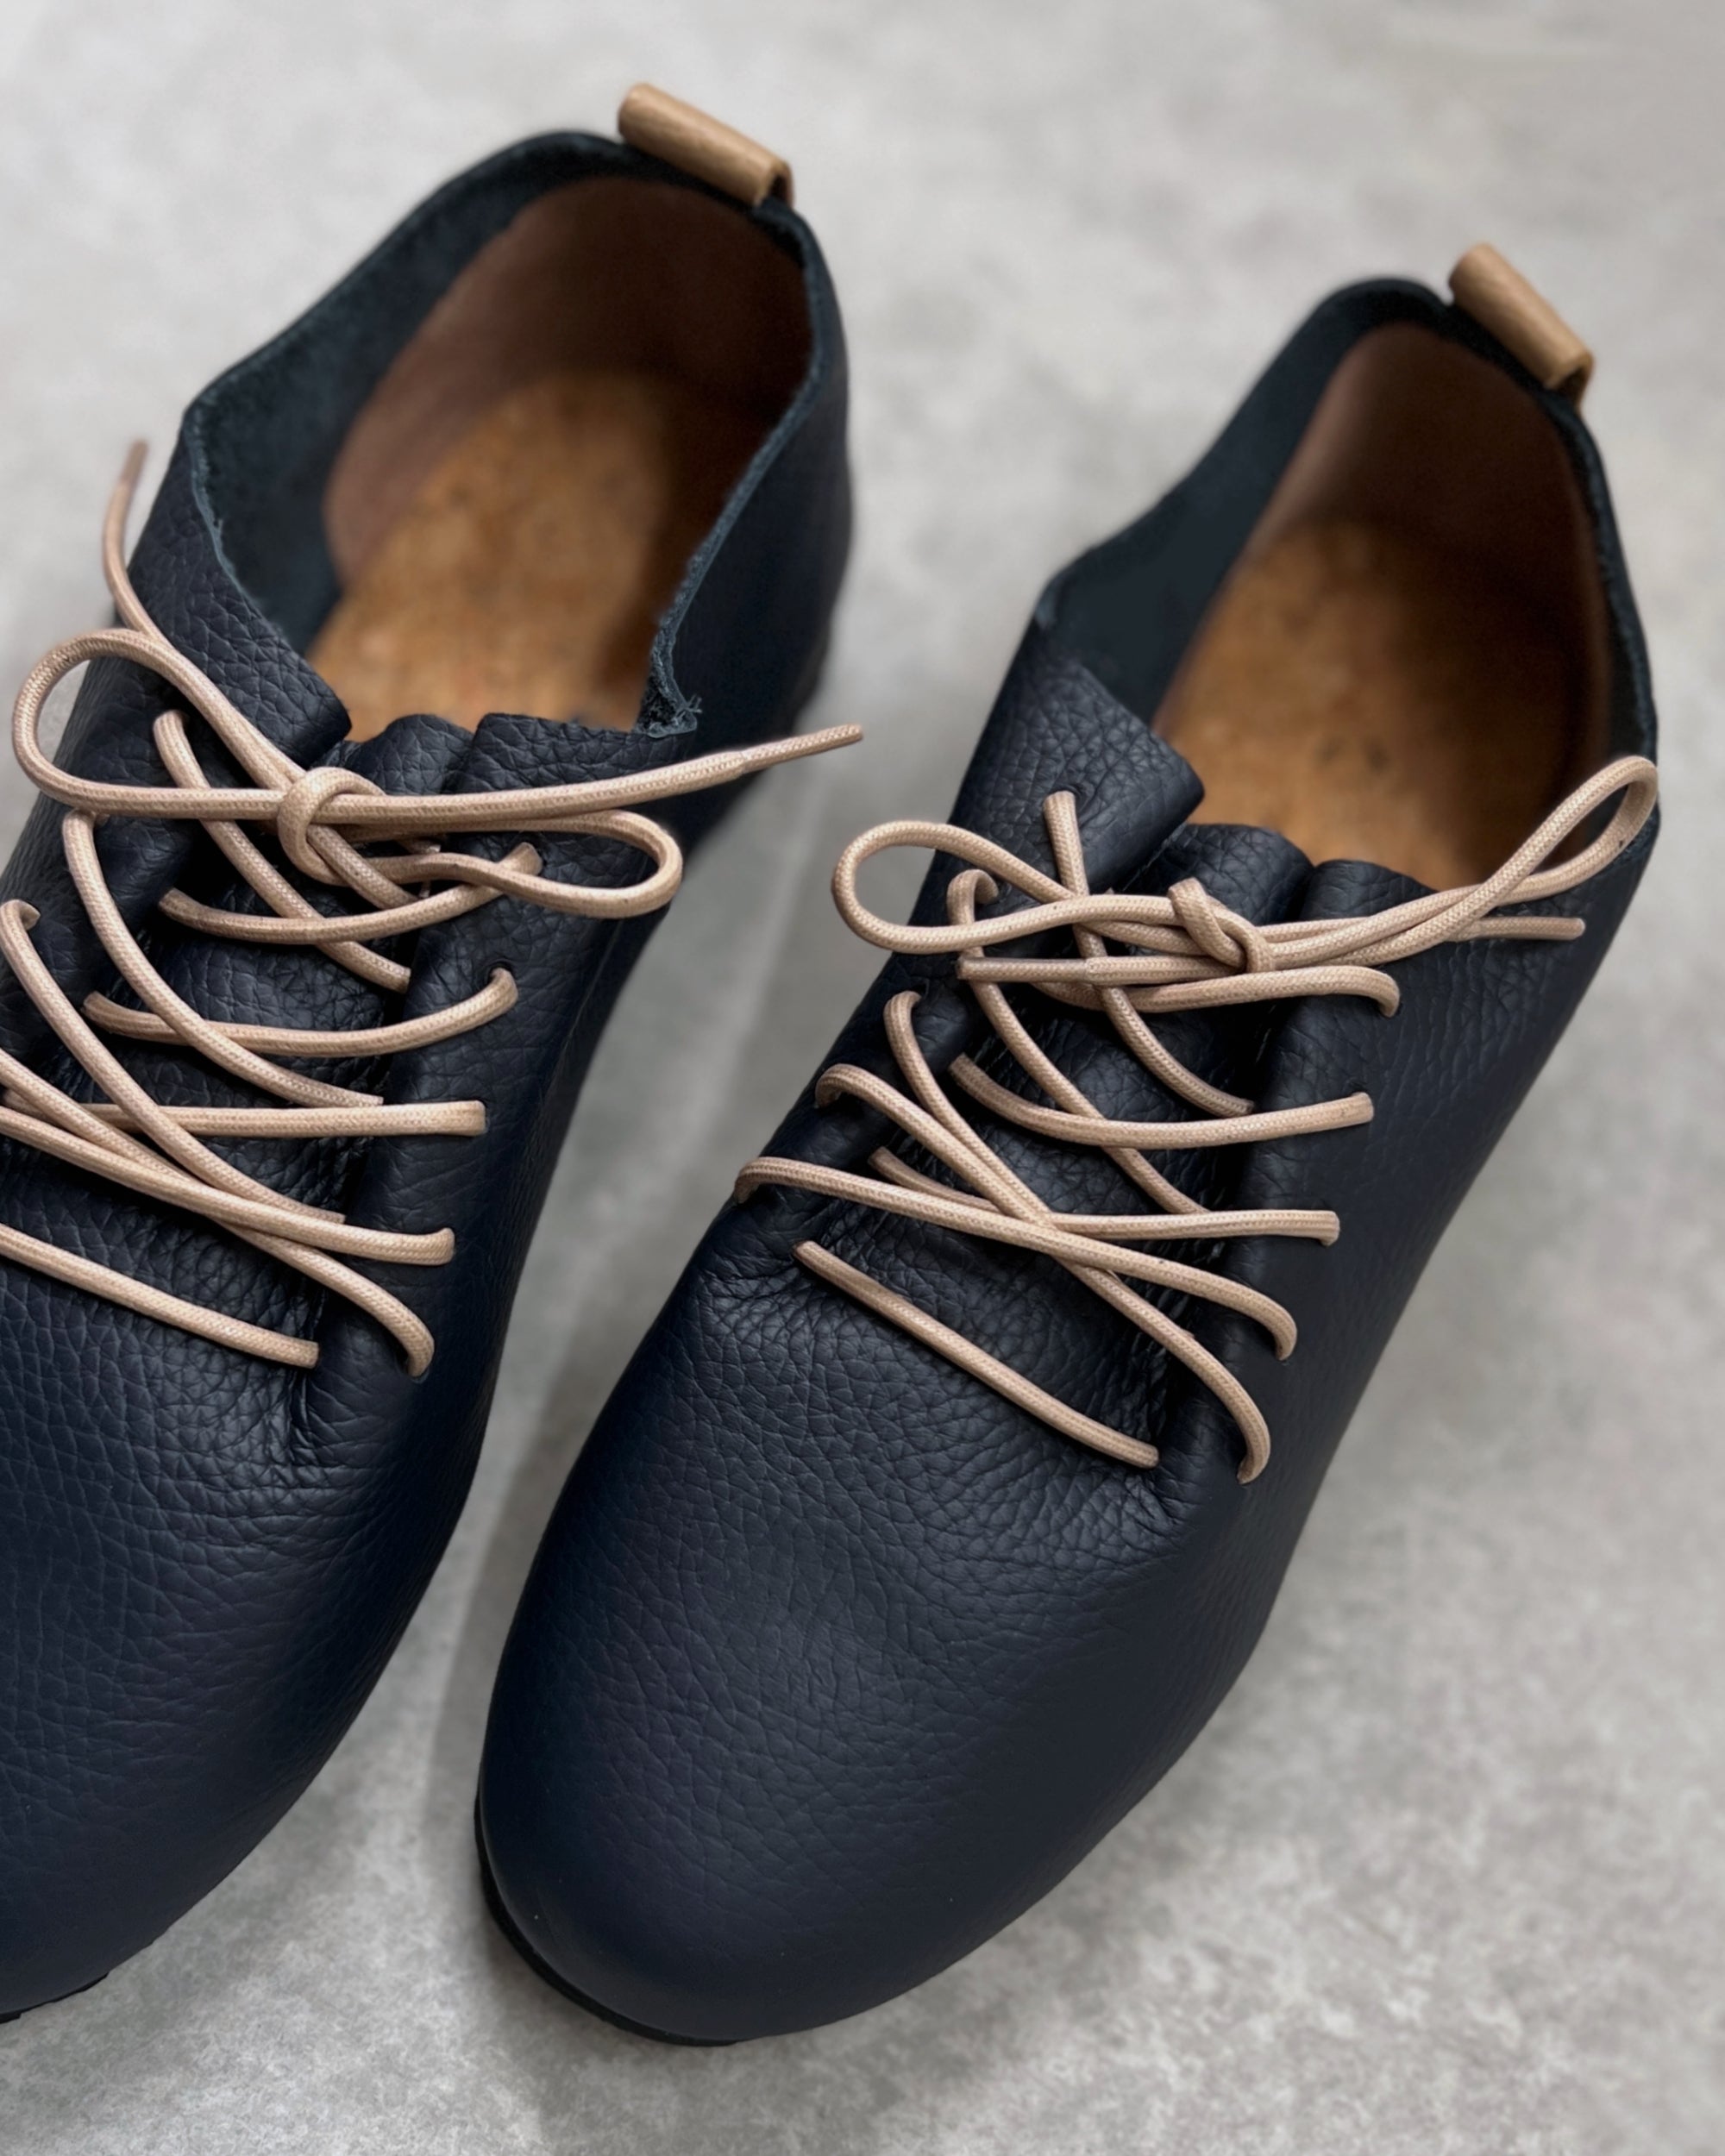 Swaanarlberg japanese leather shoes, made just for the maker